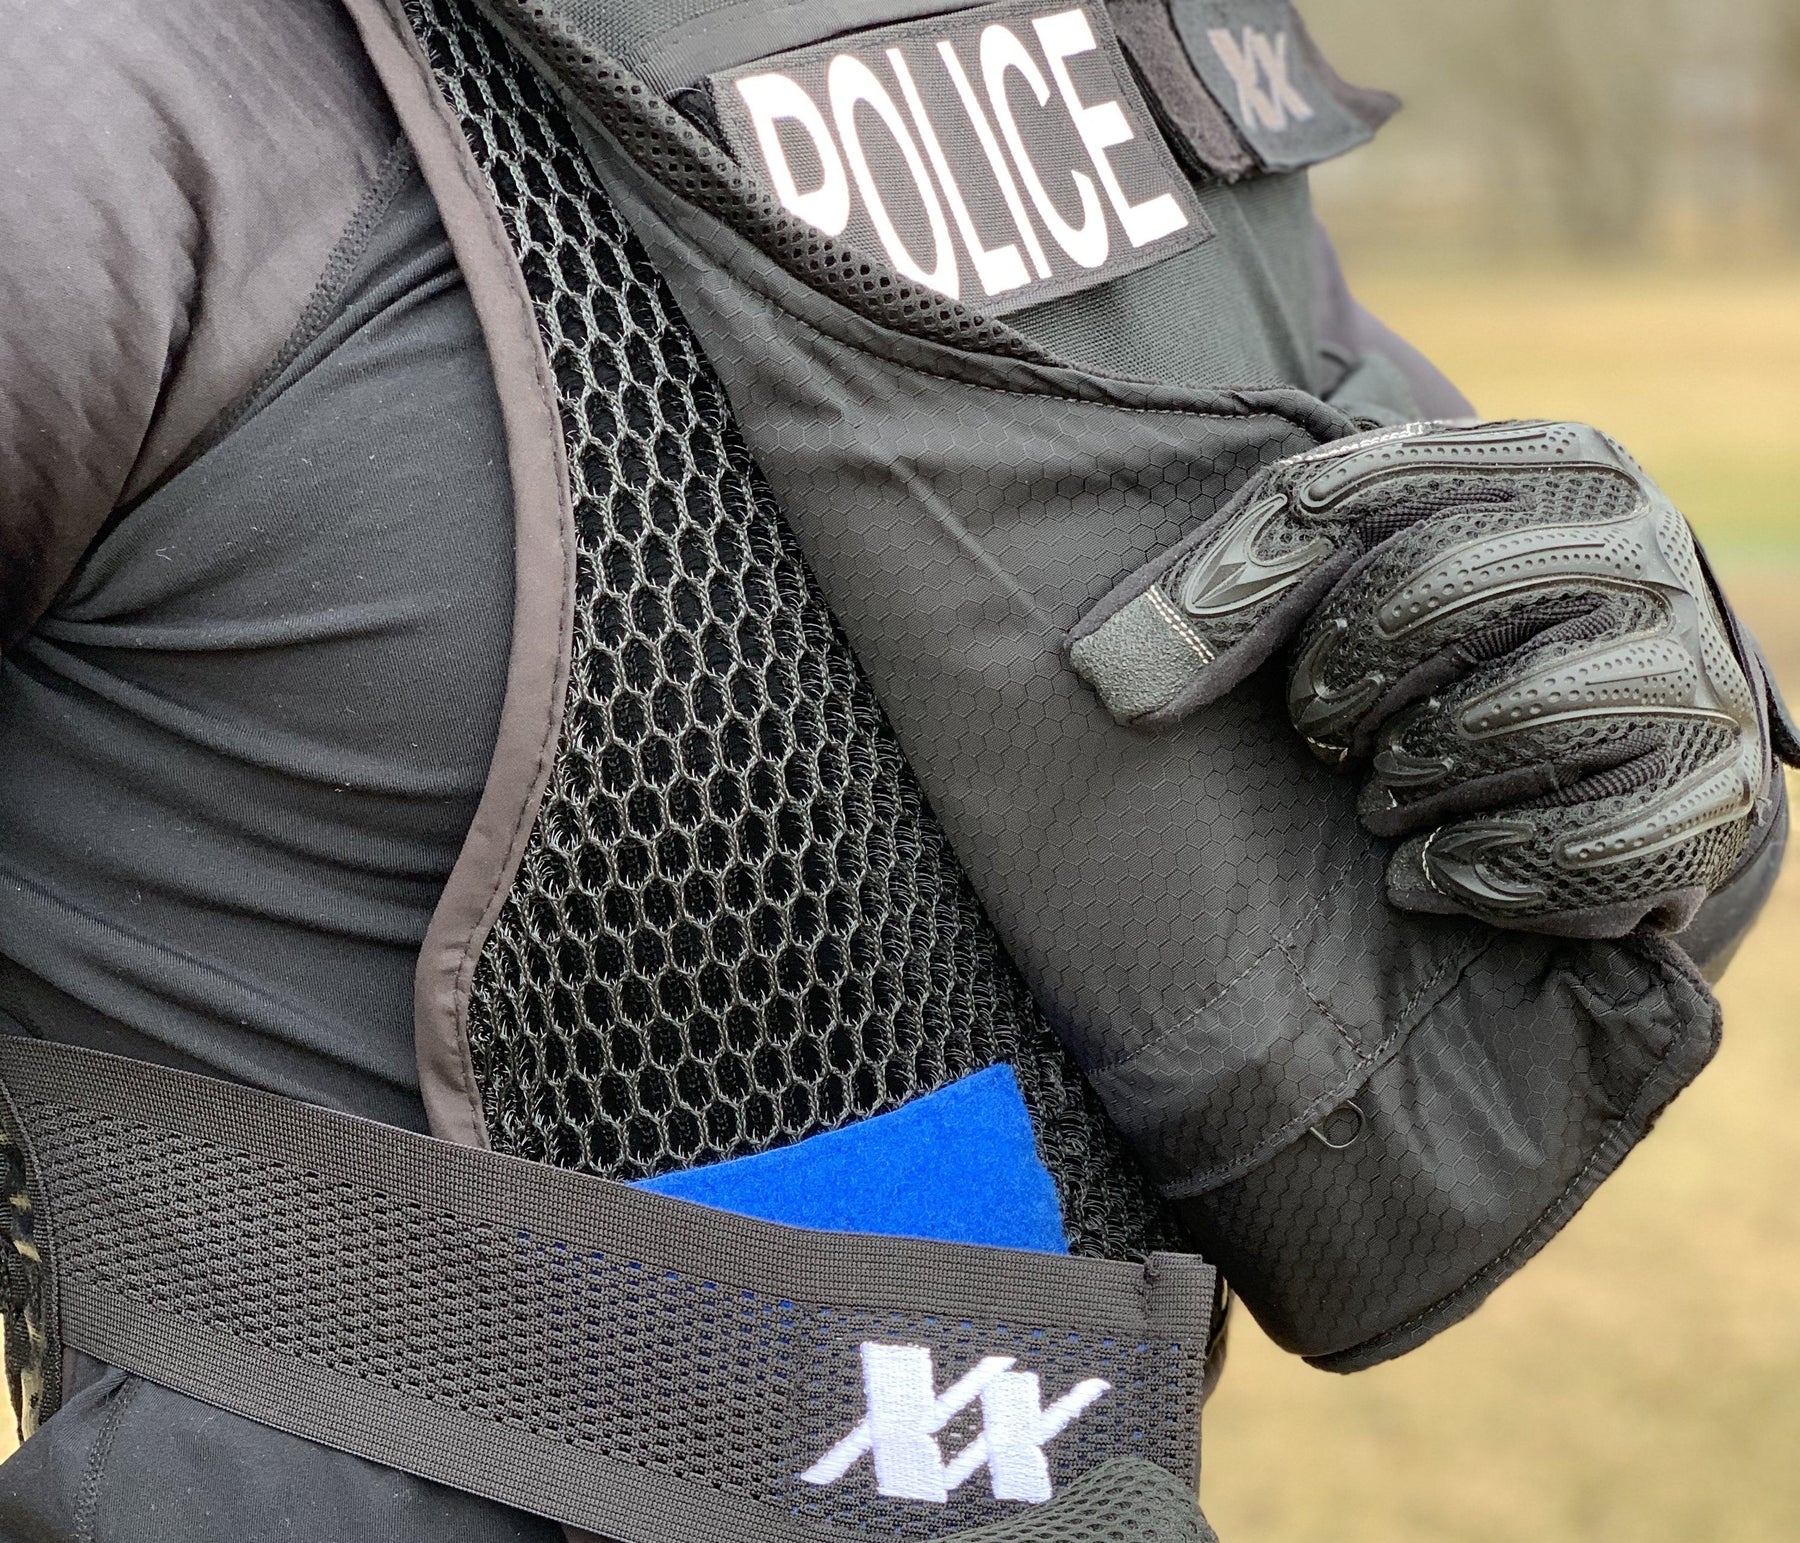 Maxx-Dri 4.0 - The Best Body Armor Ventilation & Cooling Vest For Police Officers Just Got Even Better